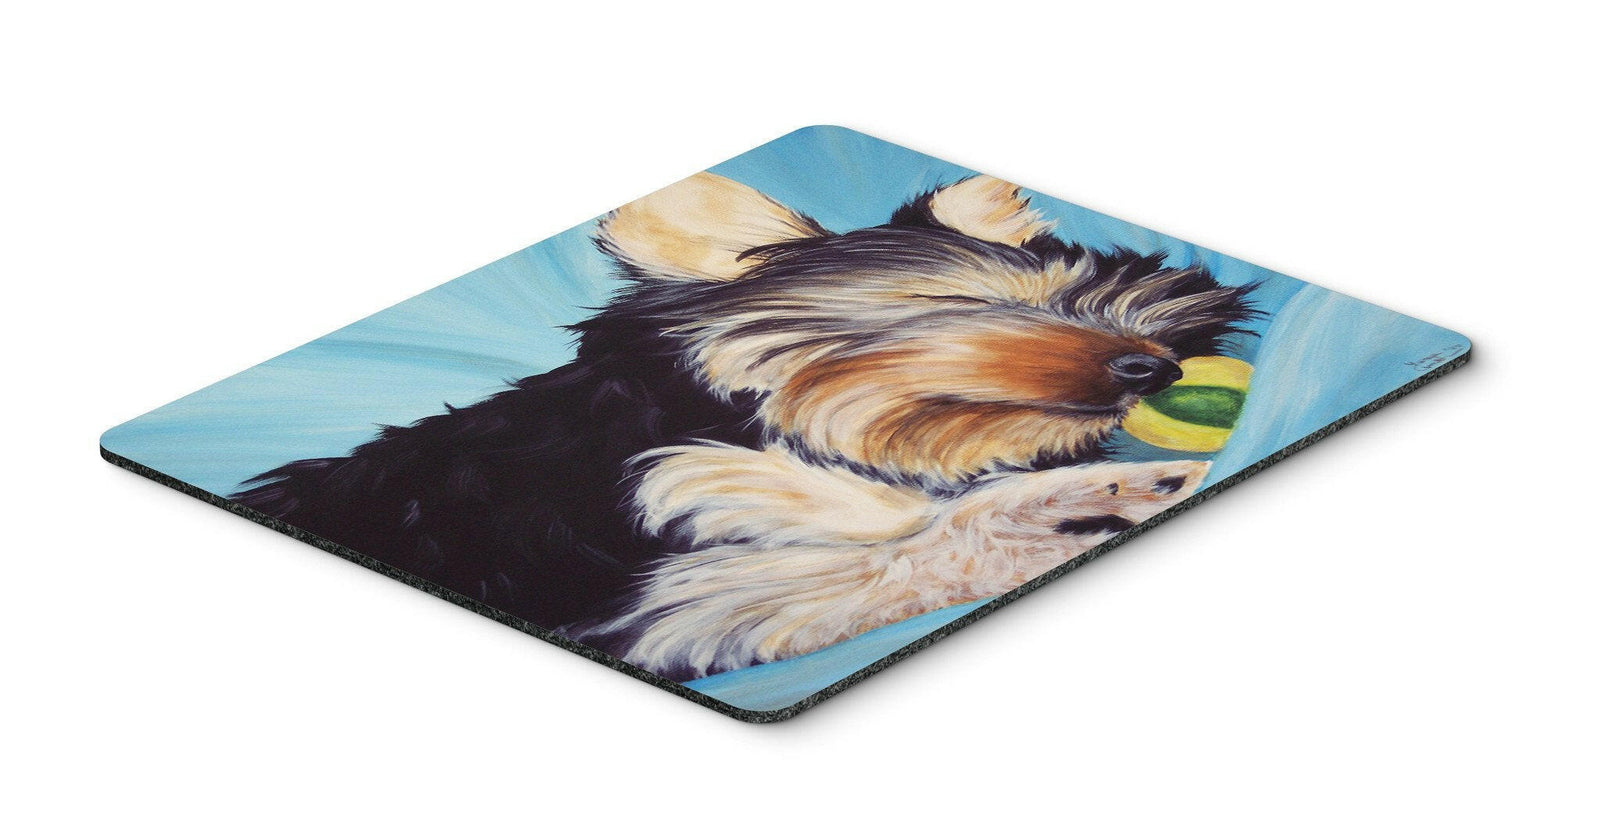 Naptime Yorkie Yorkshire Terrier Mouse Pad, Hot Pad or Trivet AMB1075MP by Caroline's Treasures